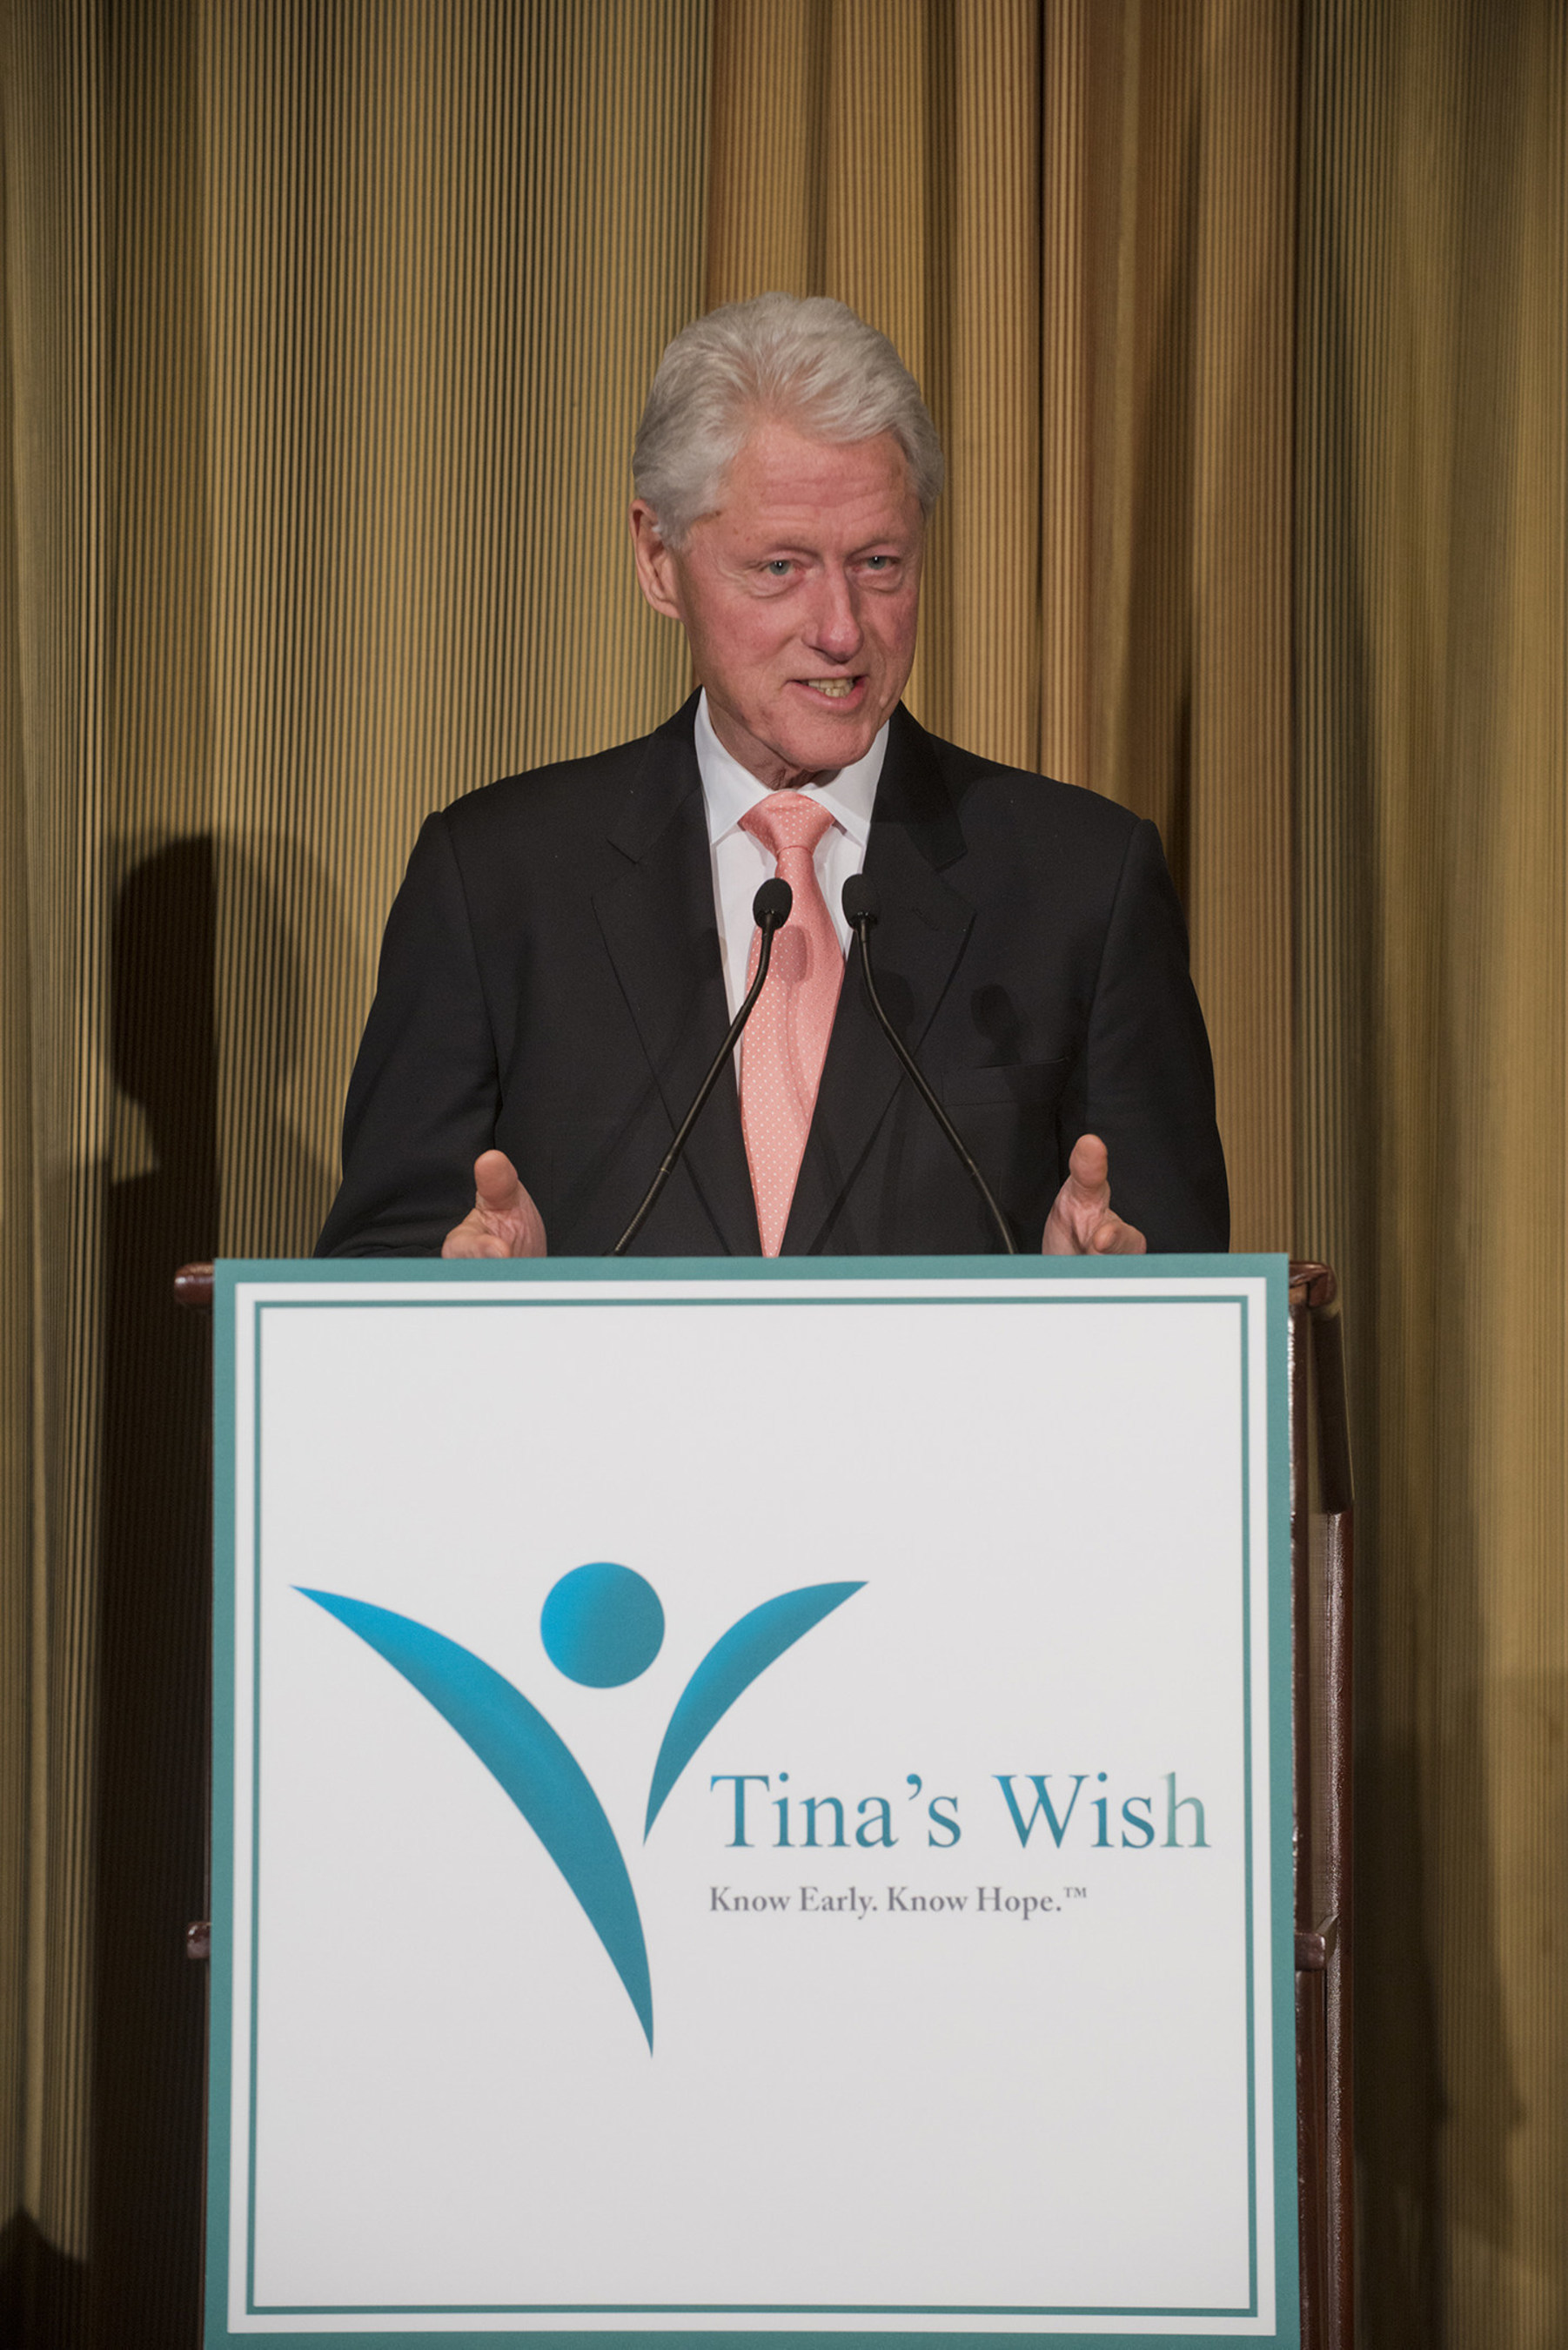 President Bill Clinton speaks about the power of collaboration and cooperation during the Tina's Wish Global Women's Health Award reception at The Waldorf Astoria